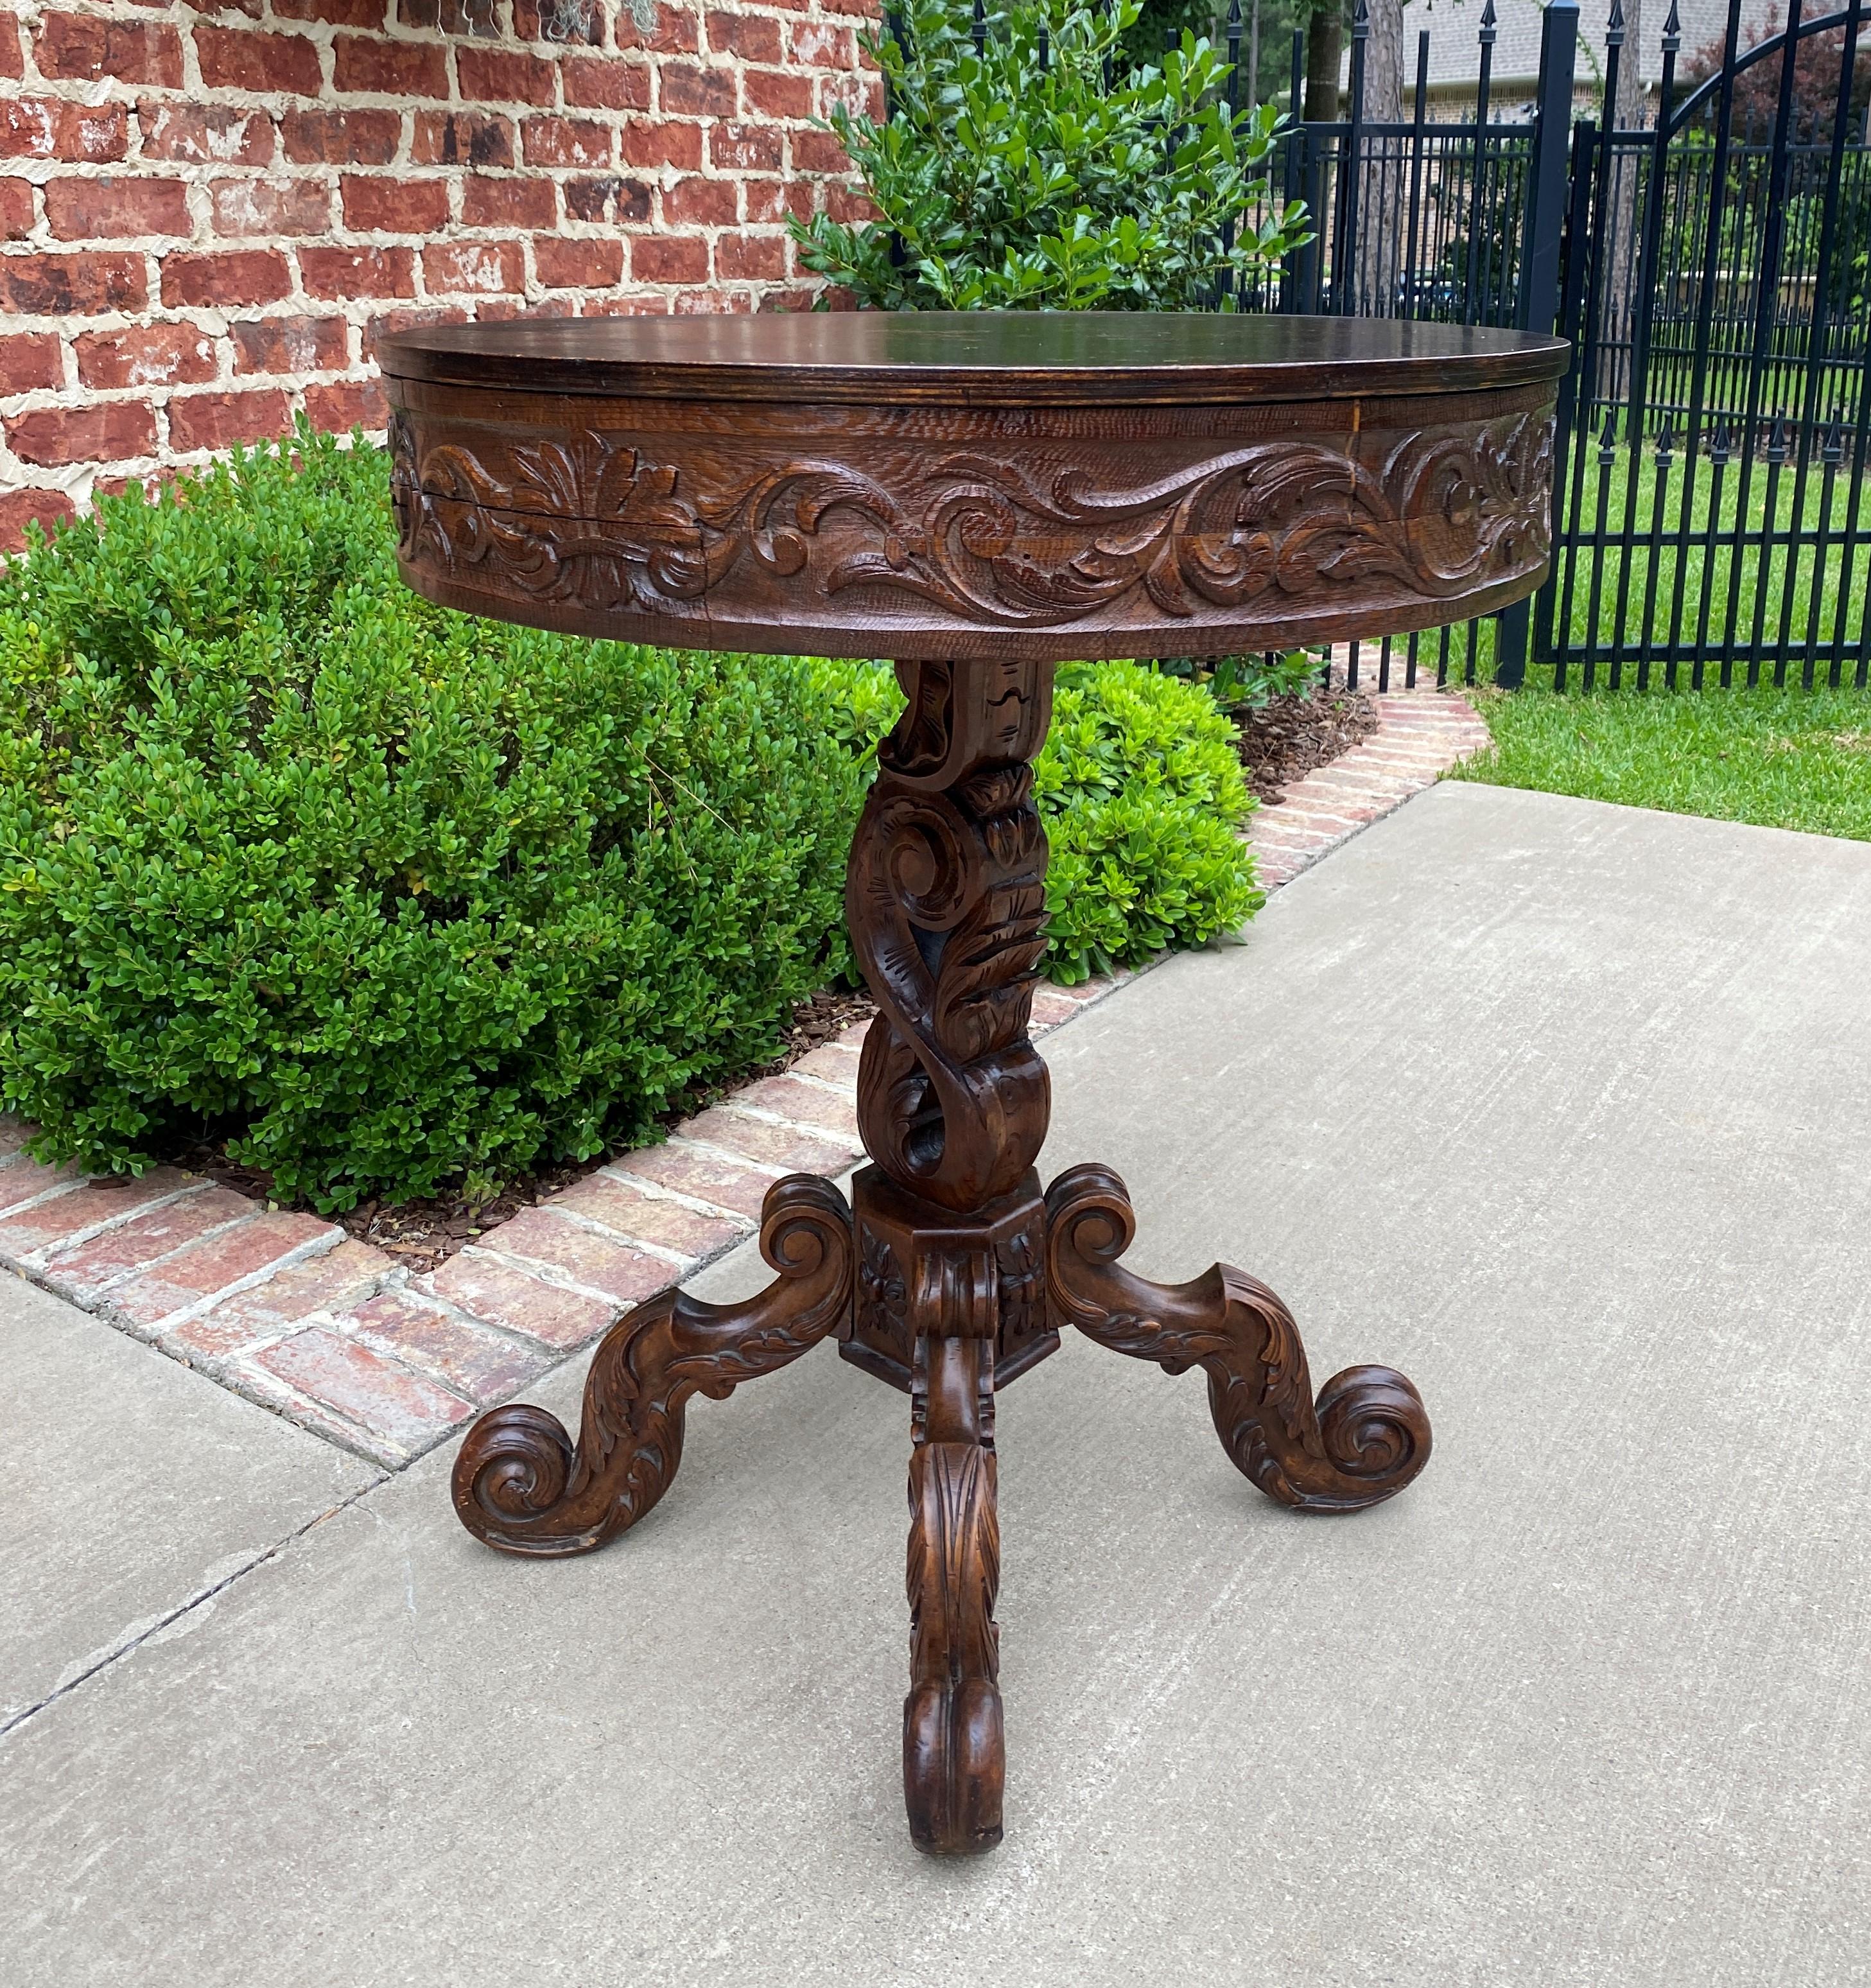 Superb highly carved late 19th century antique Oak round entry, hall, sofa, center, foyer, or parlor table, end table, or pedestal~~Victorian Era Renaissance Revival
~~c. 1890s

These versatile tables were very popular in late Victorian era